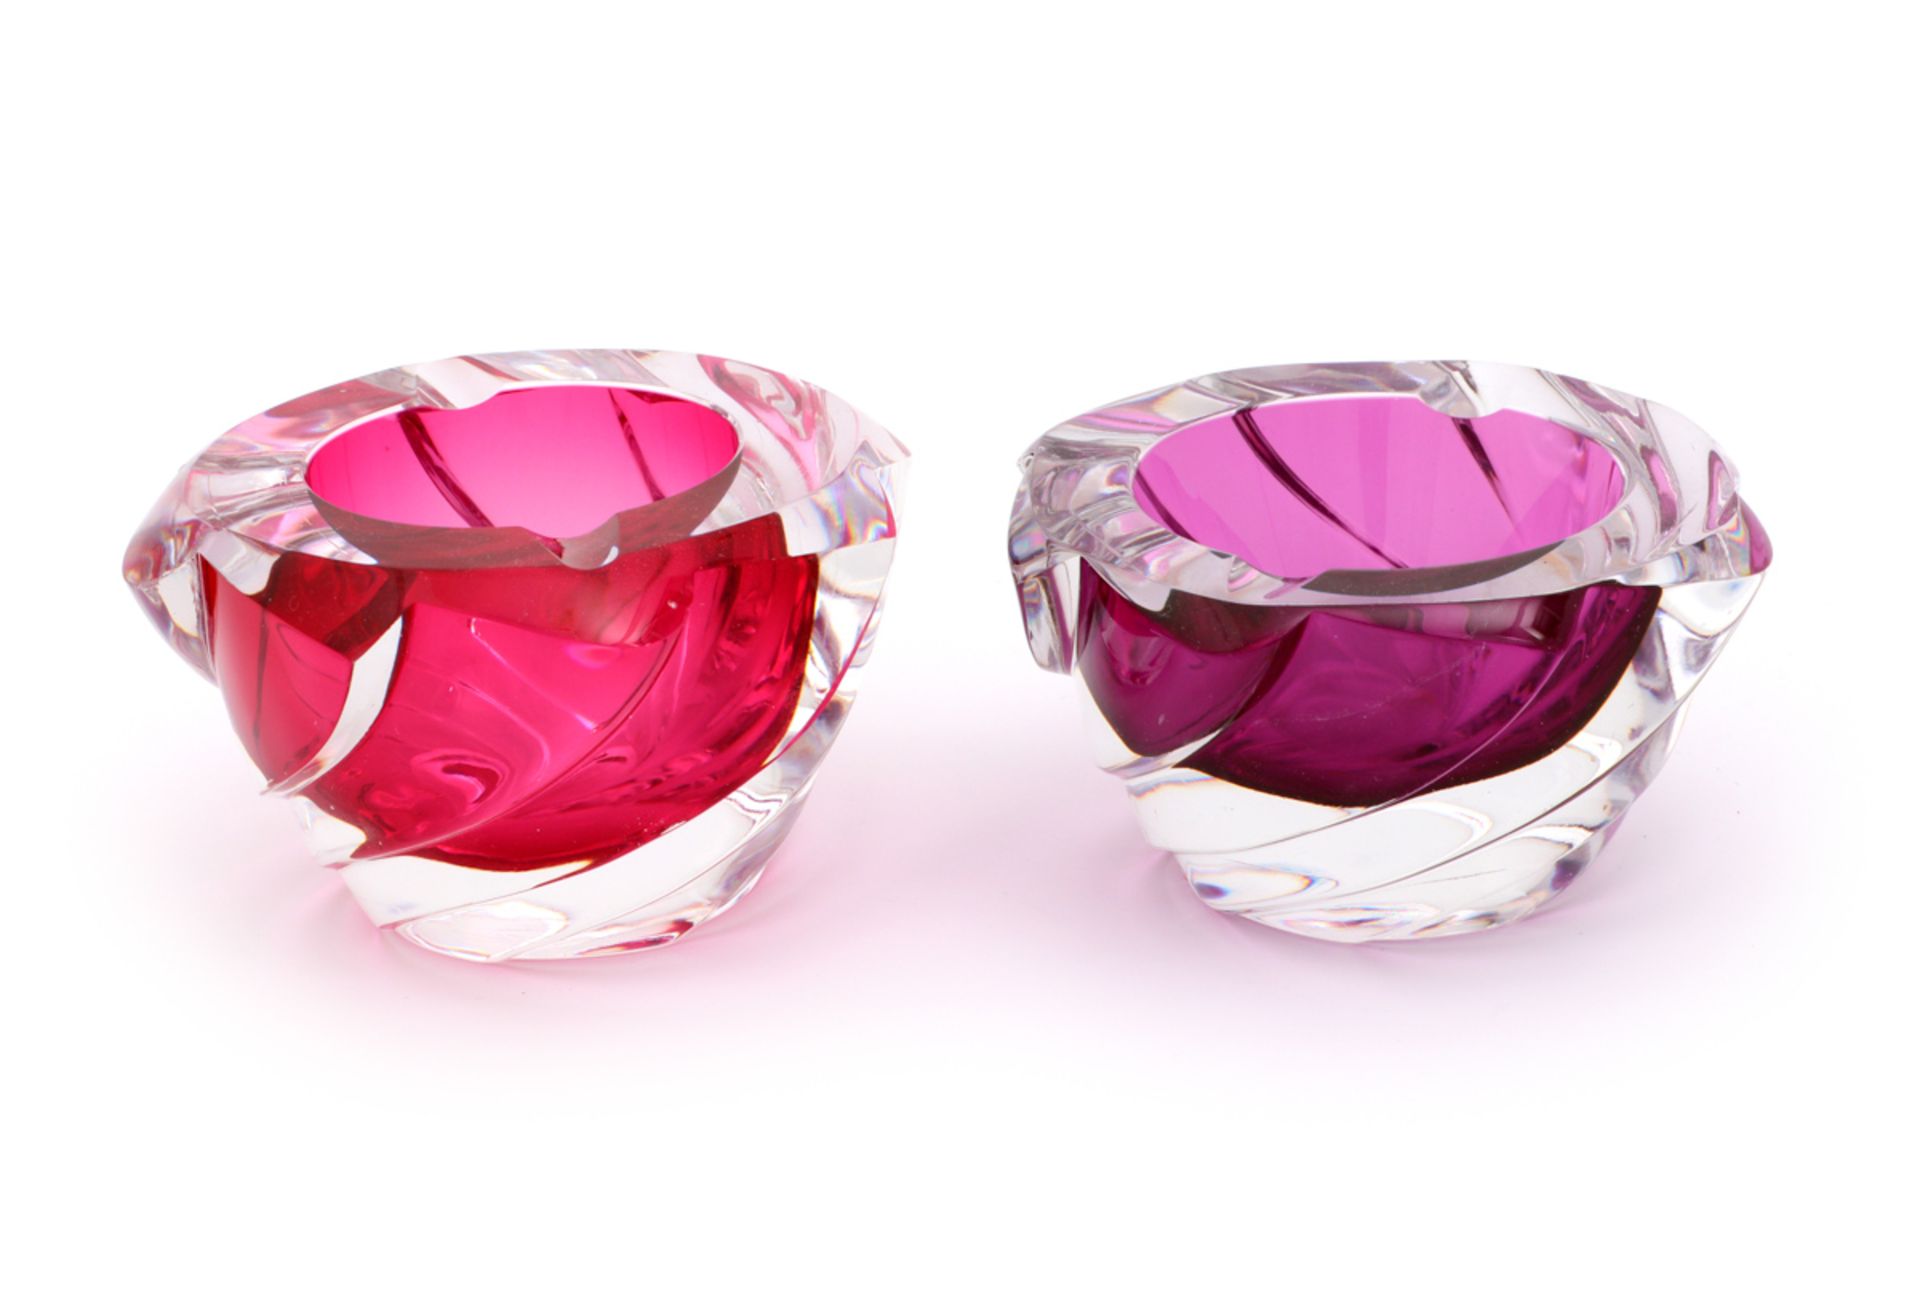 A PAIR OF CRYSTAL ASHTRAYS Val de St. Lambert crystal, 1950s, translucent and rose shades